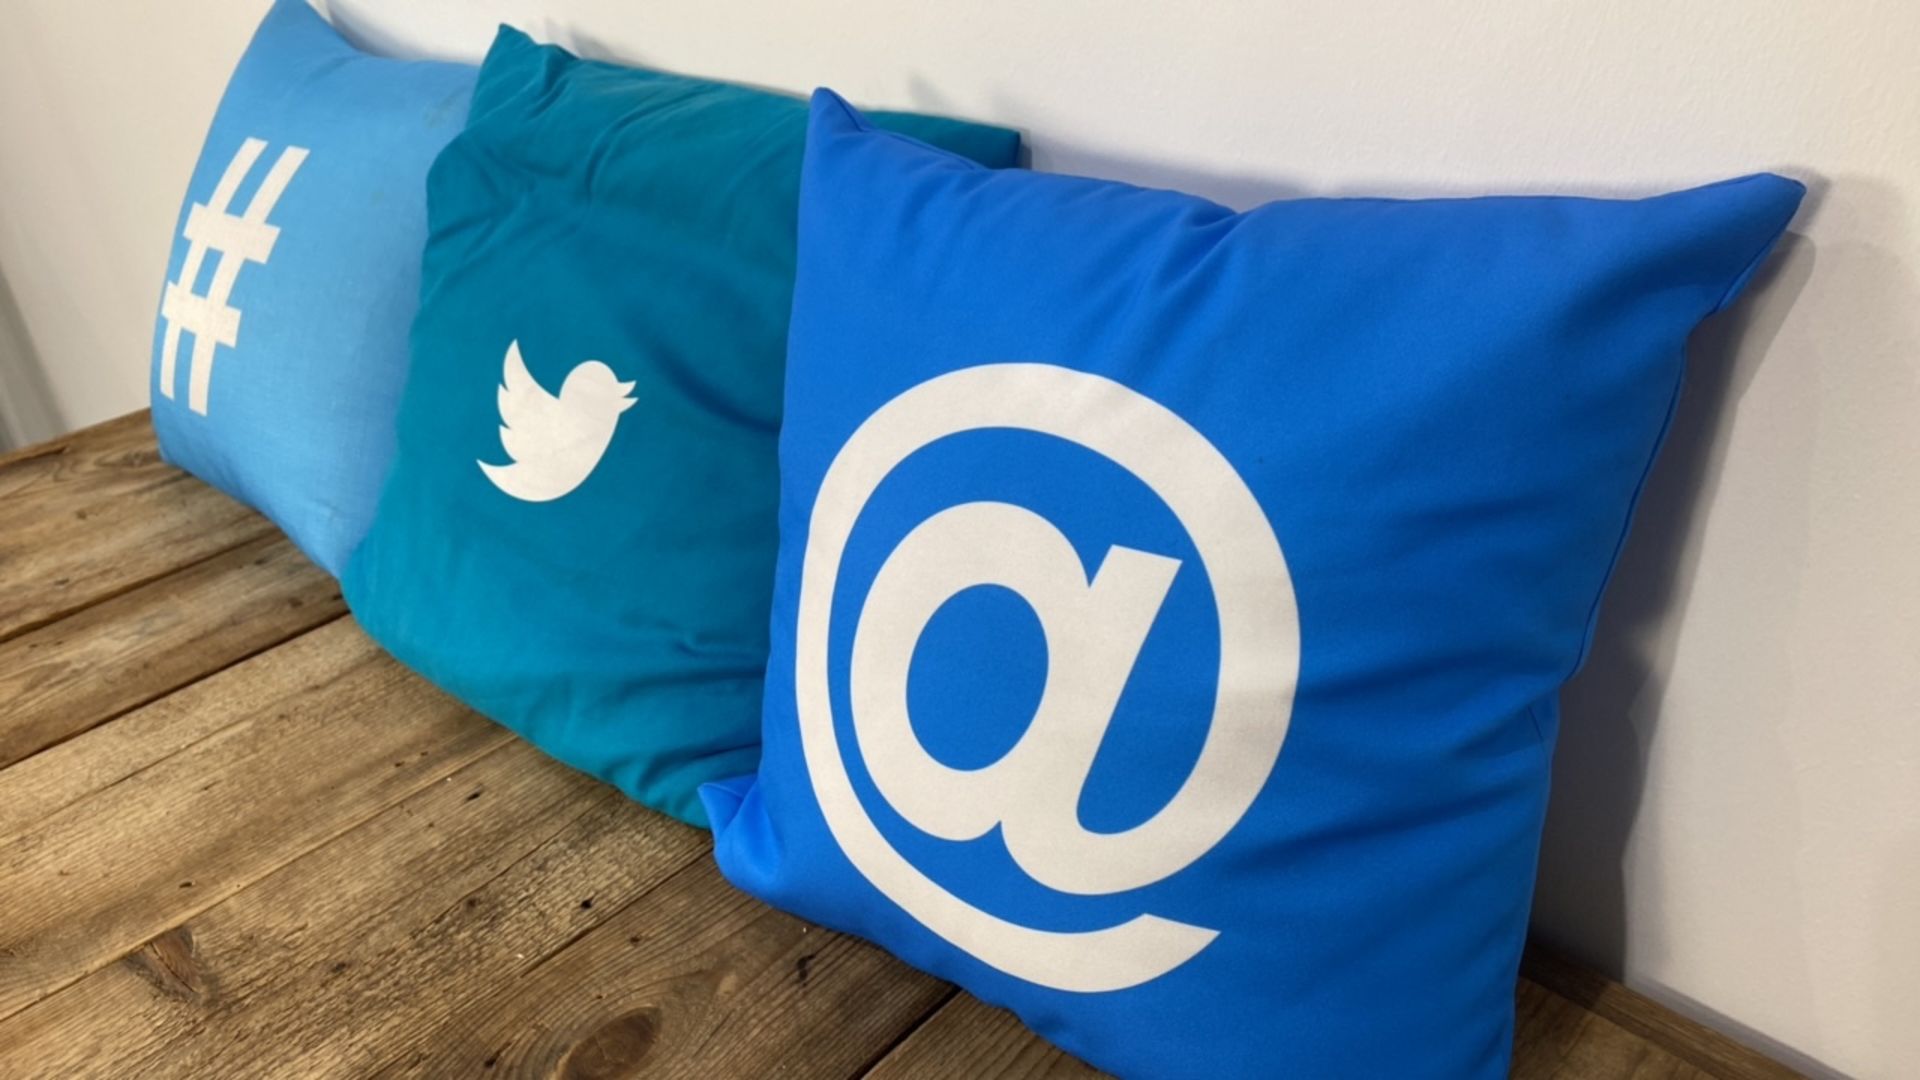 Twitter Cushions X3 - Image 3 of 3